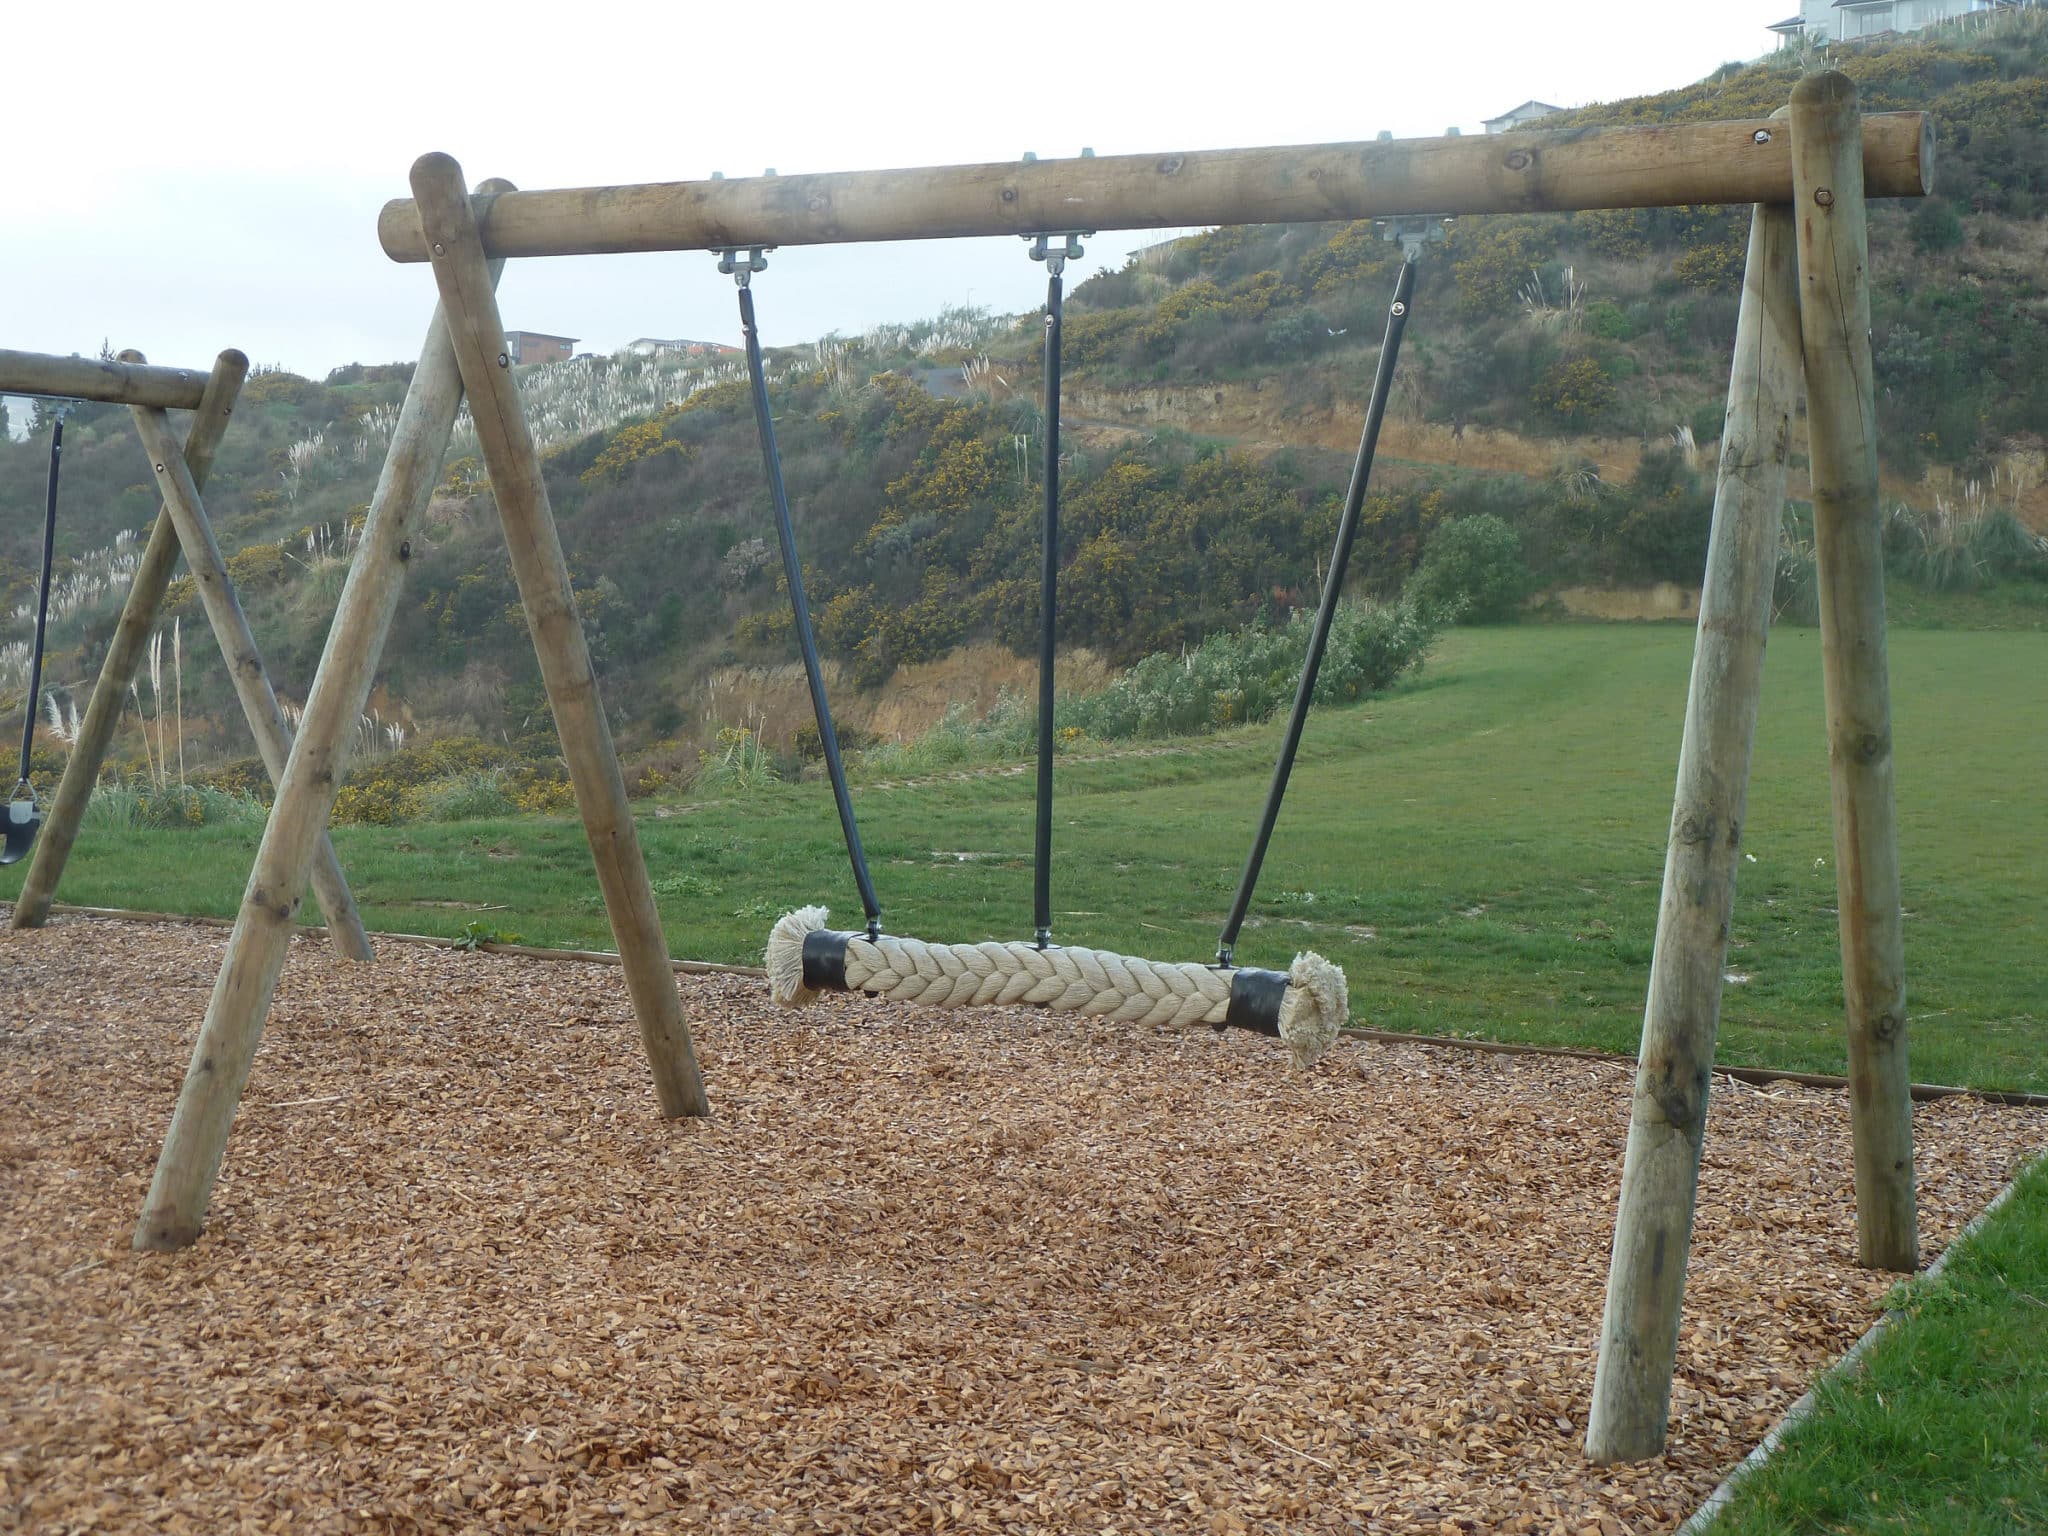 https://www.playgroundcentre.com/wp-content/uploads/2017/04/Duo-Rope-Swing-with-Timba-Frame.jpg